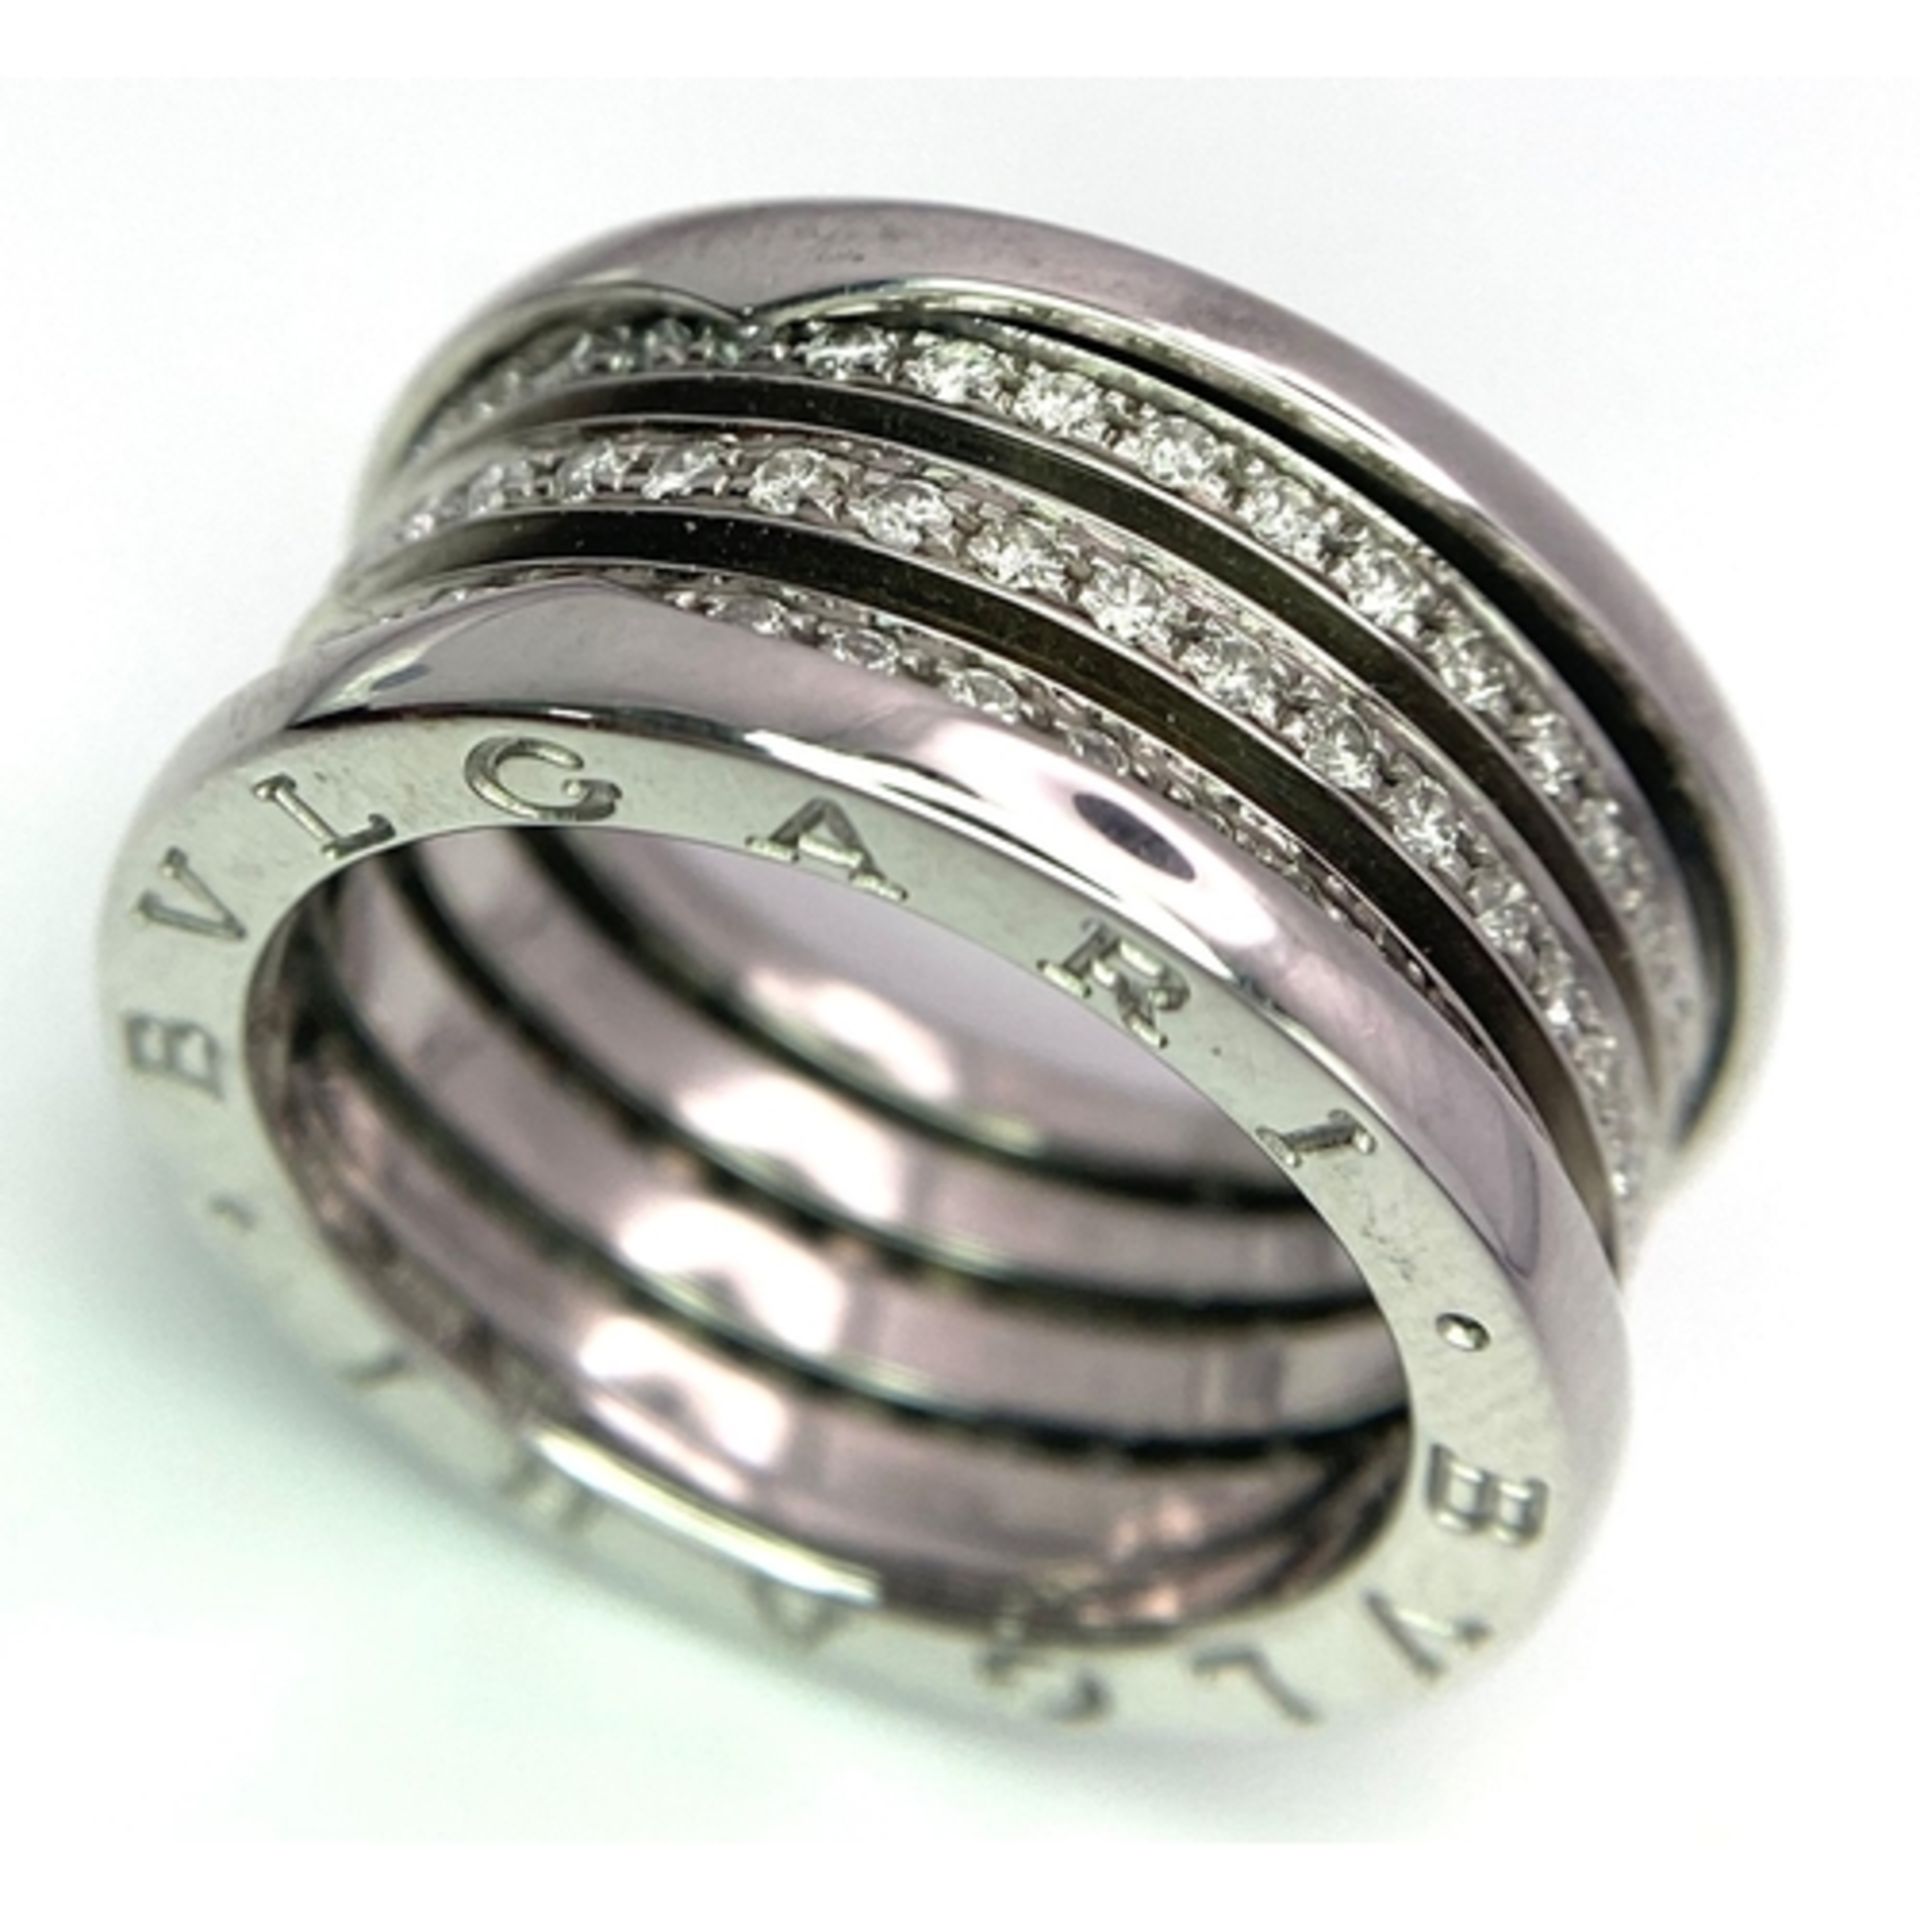 A Beautiful Bulgari 3 Row Expandable Bandeau Ring In 18k White Gold and Diamonds, Band Width 10mm, - Bild 2 aus 7